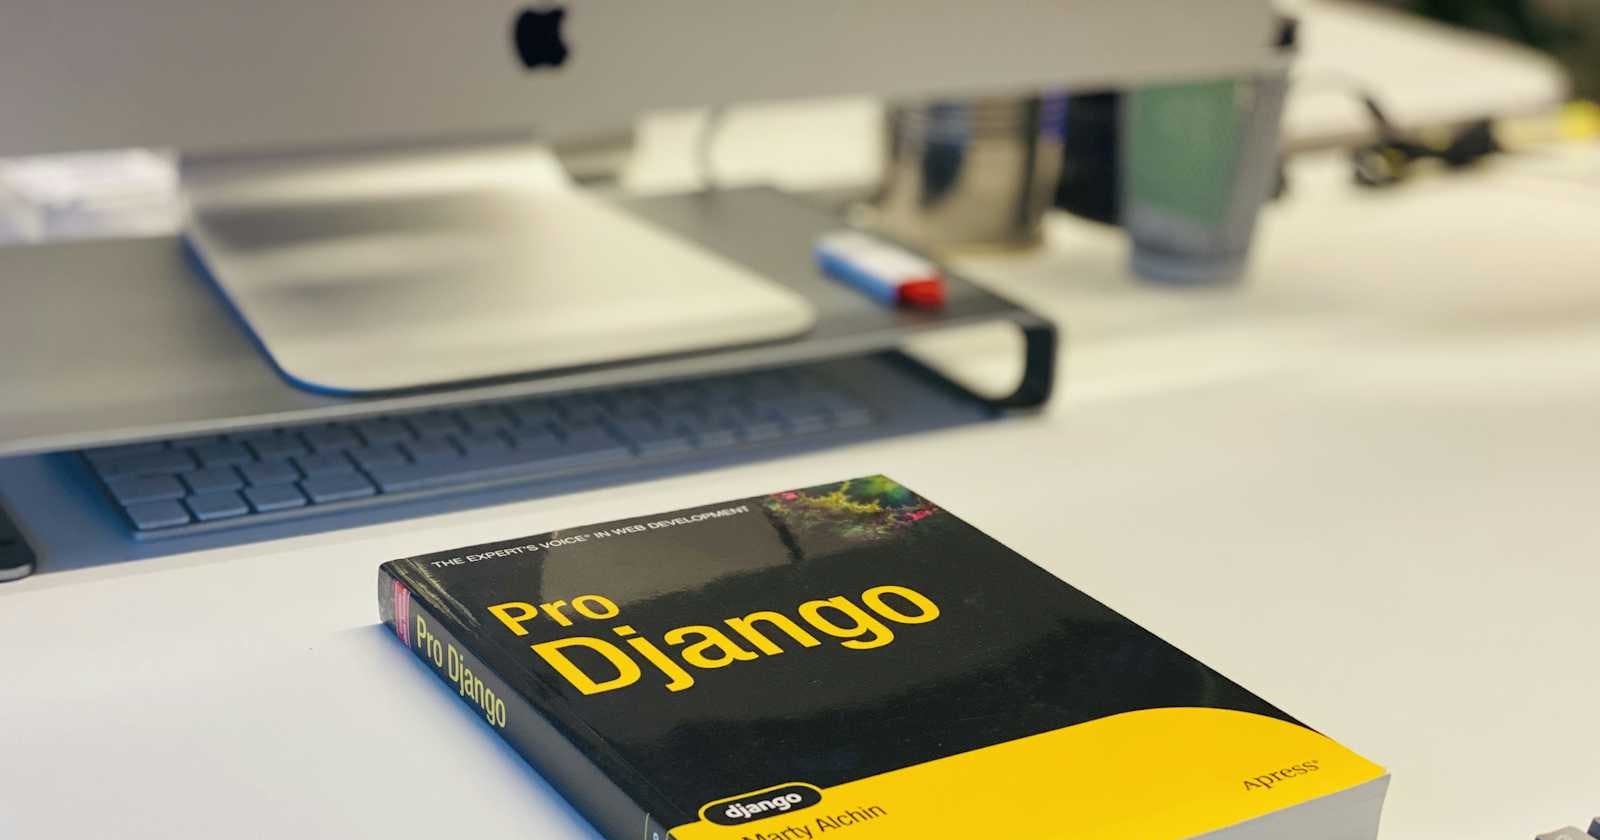 Using Django ORM only without web server